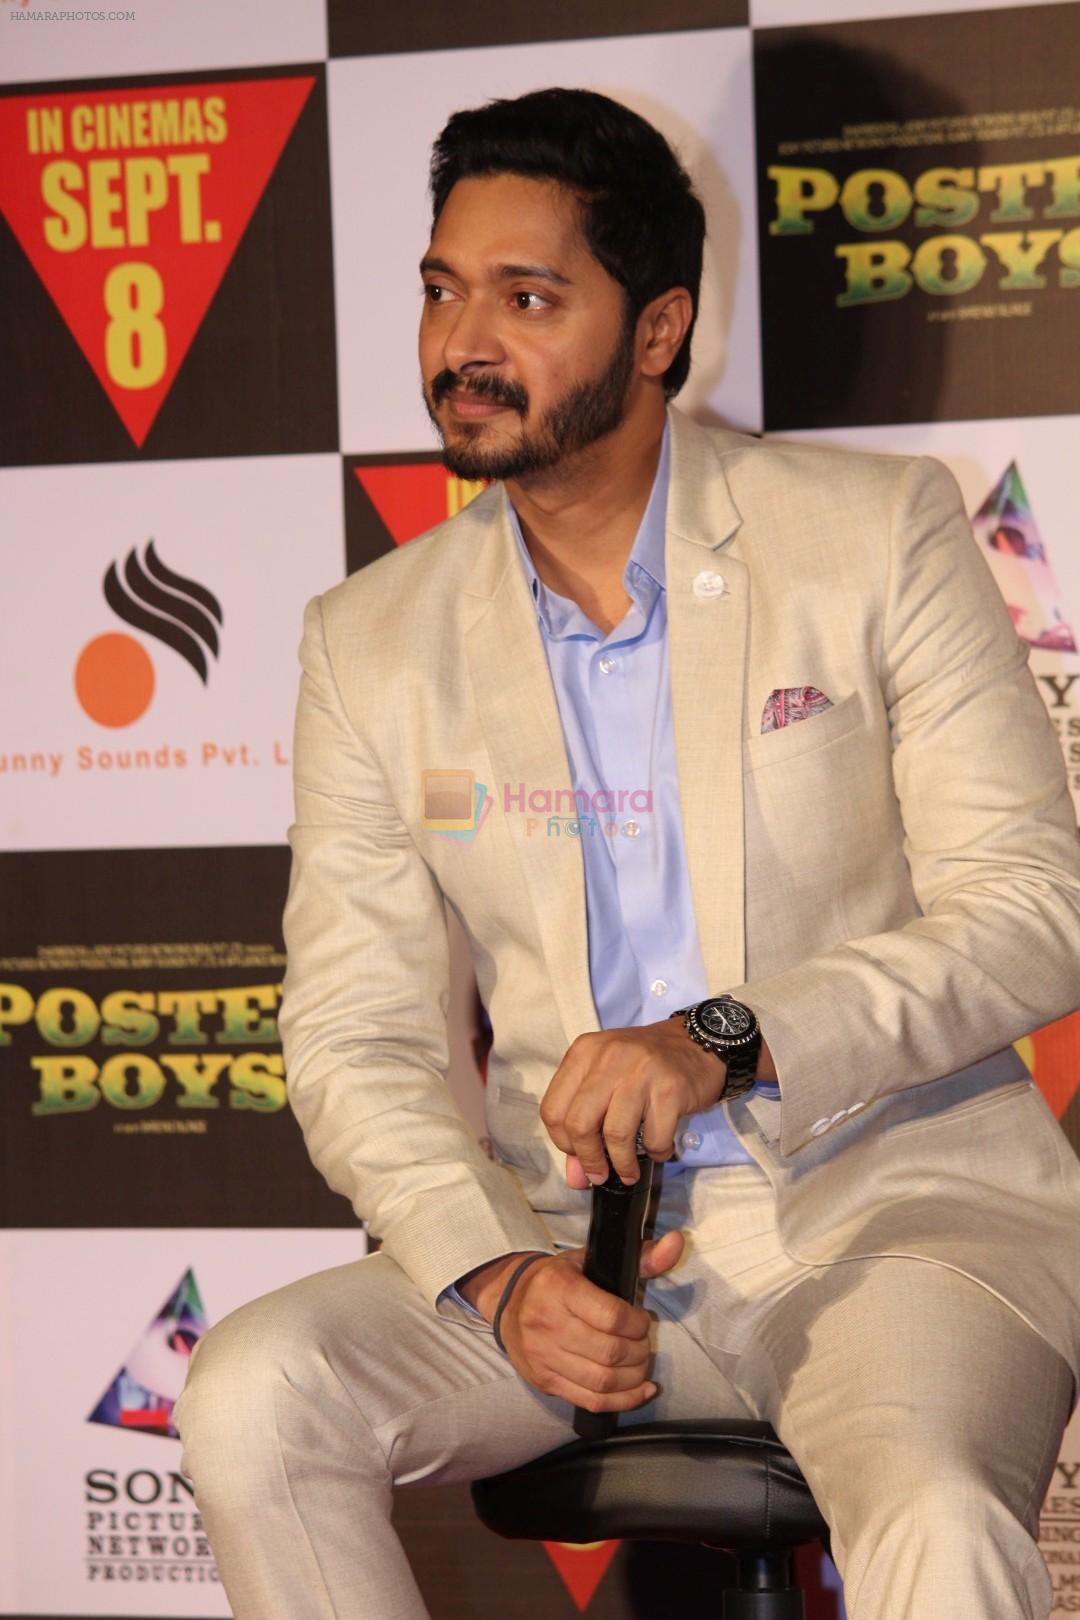 Shreyas Talpade at the Trailer Launch Of Film Poster Boys on 24th July 2017